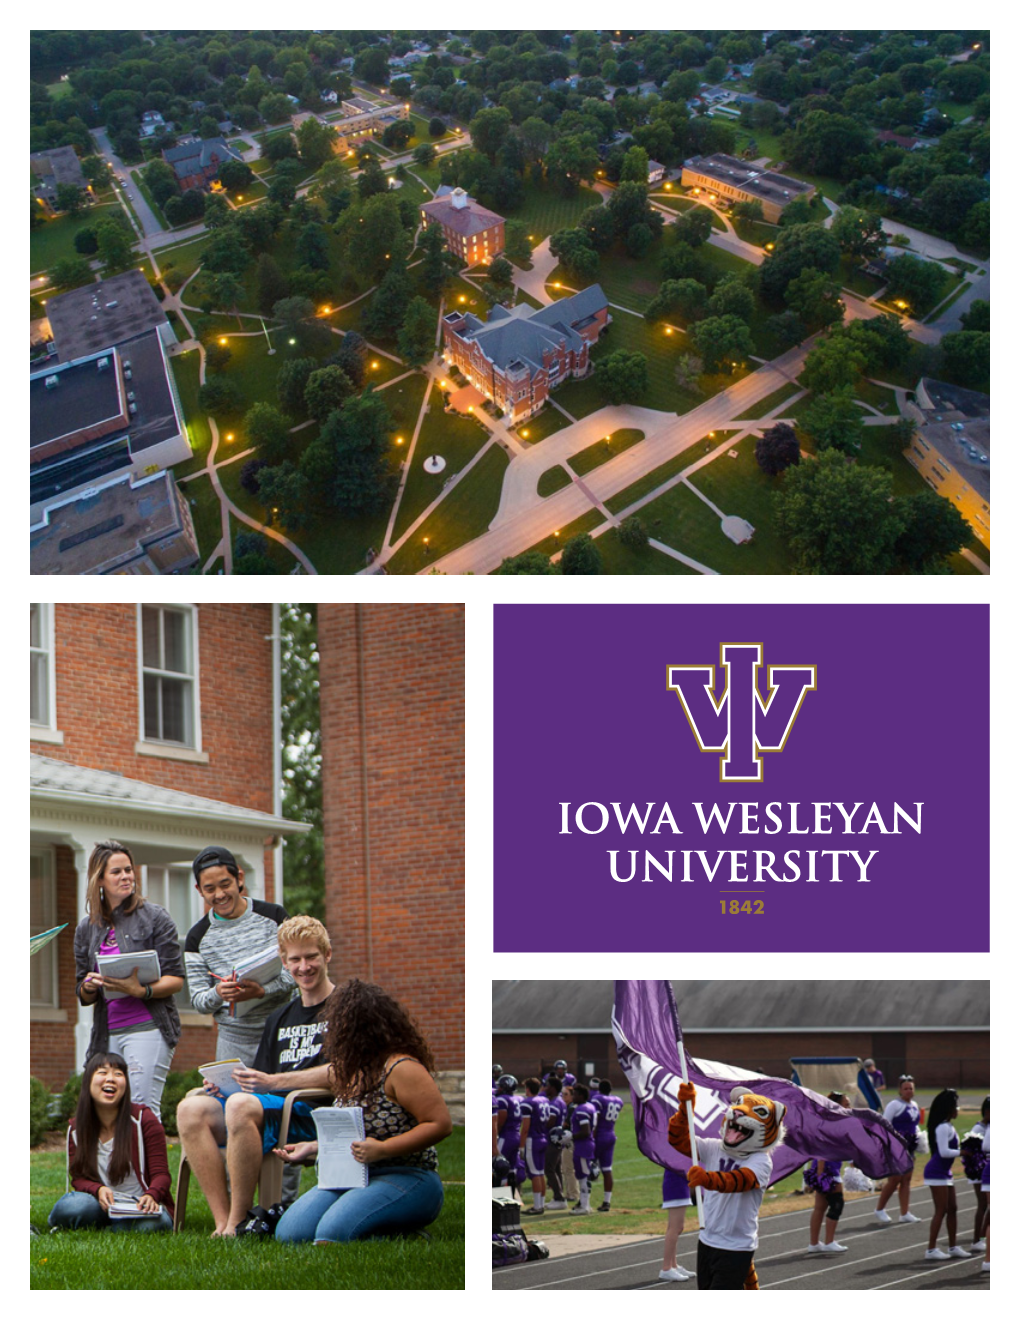 About Iowa Wesleyan University University Is a Our History: Iowa Wesleyan University Is One of the Most Historic Institutions in the United States